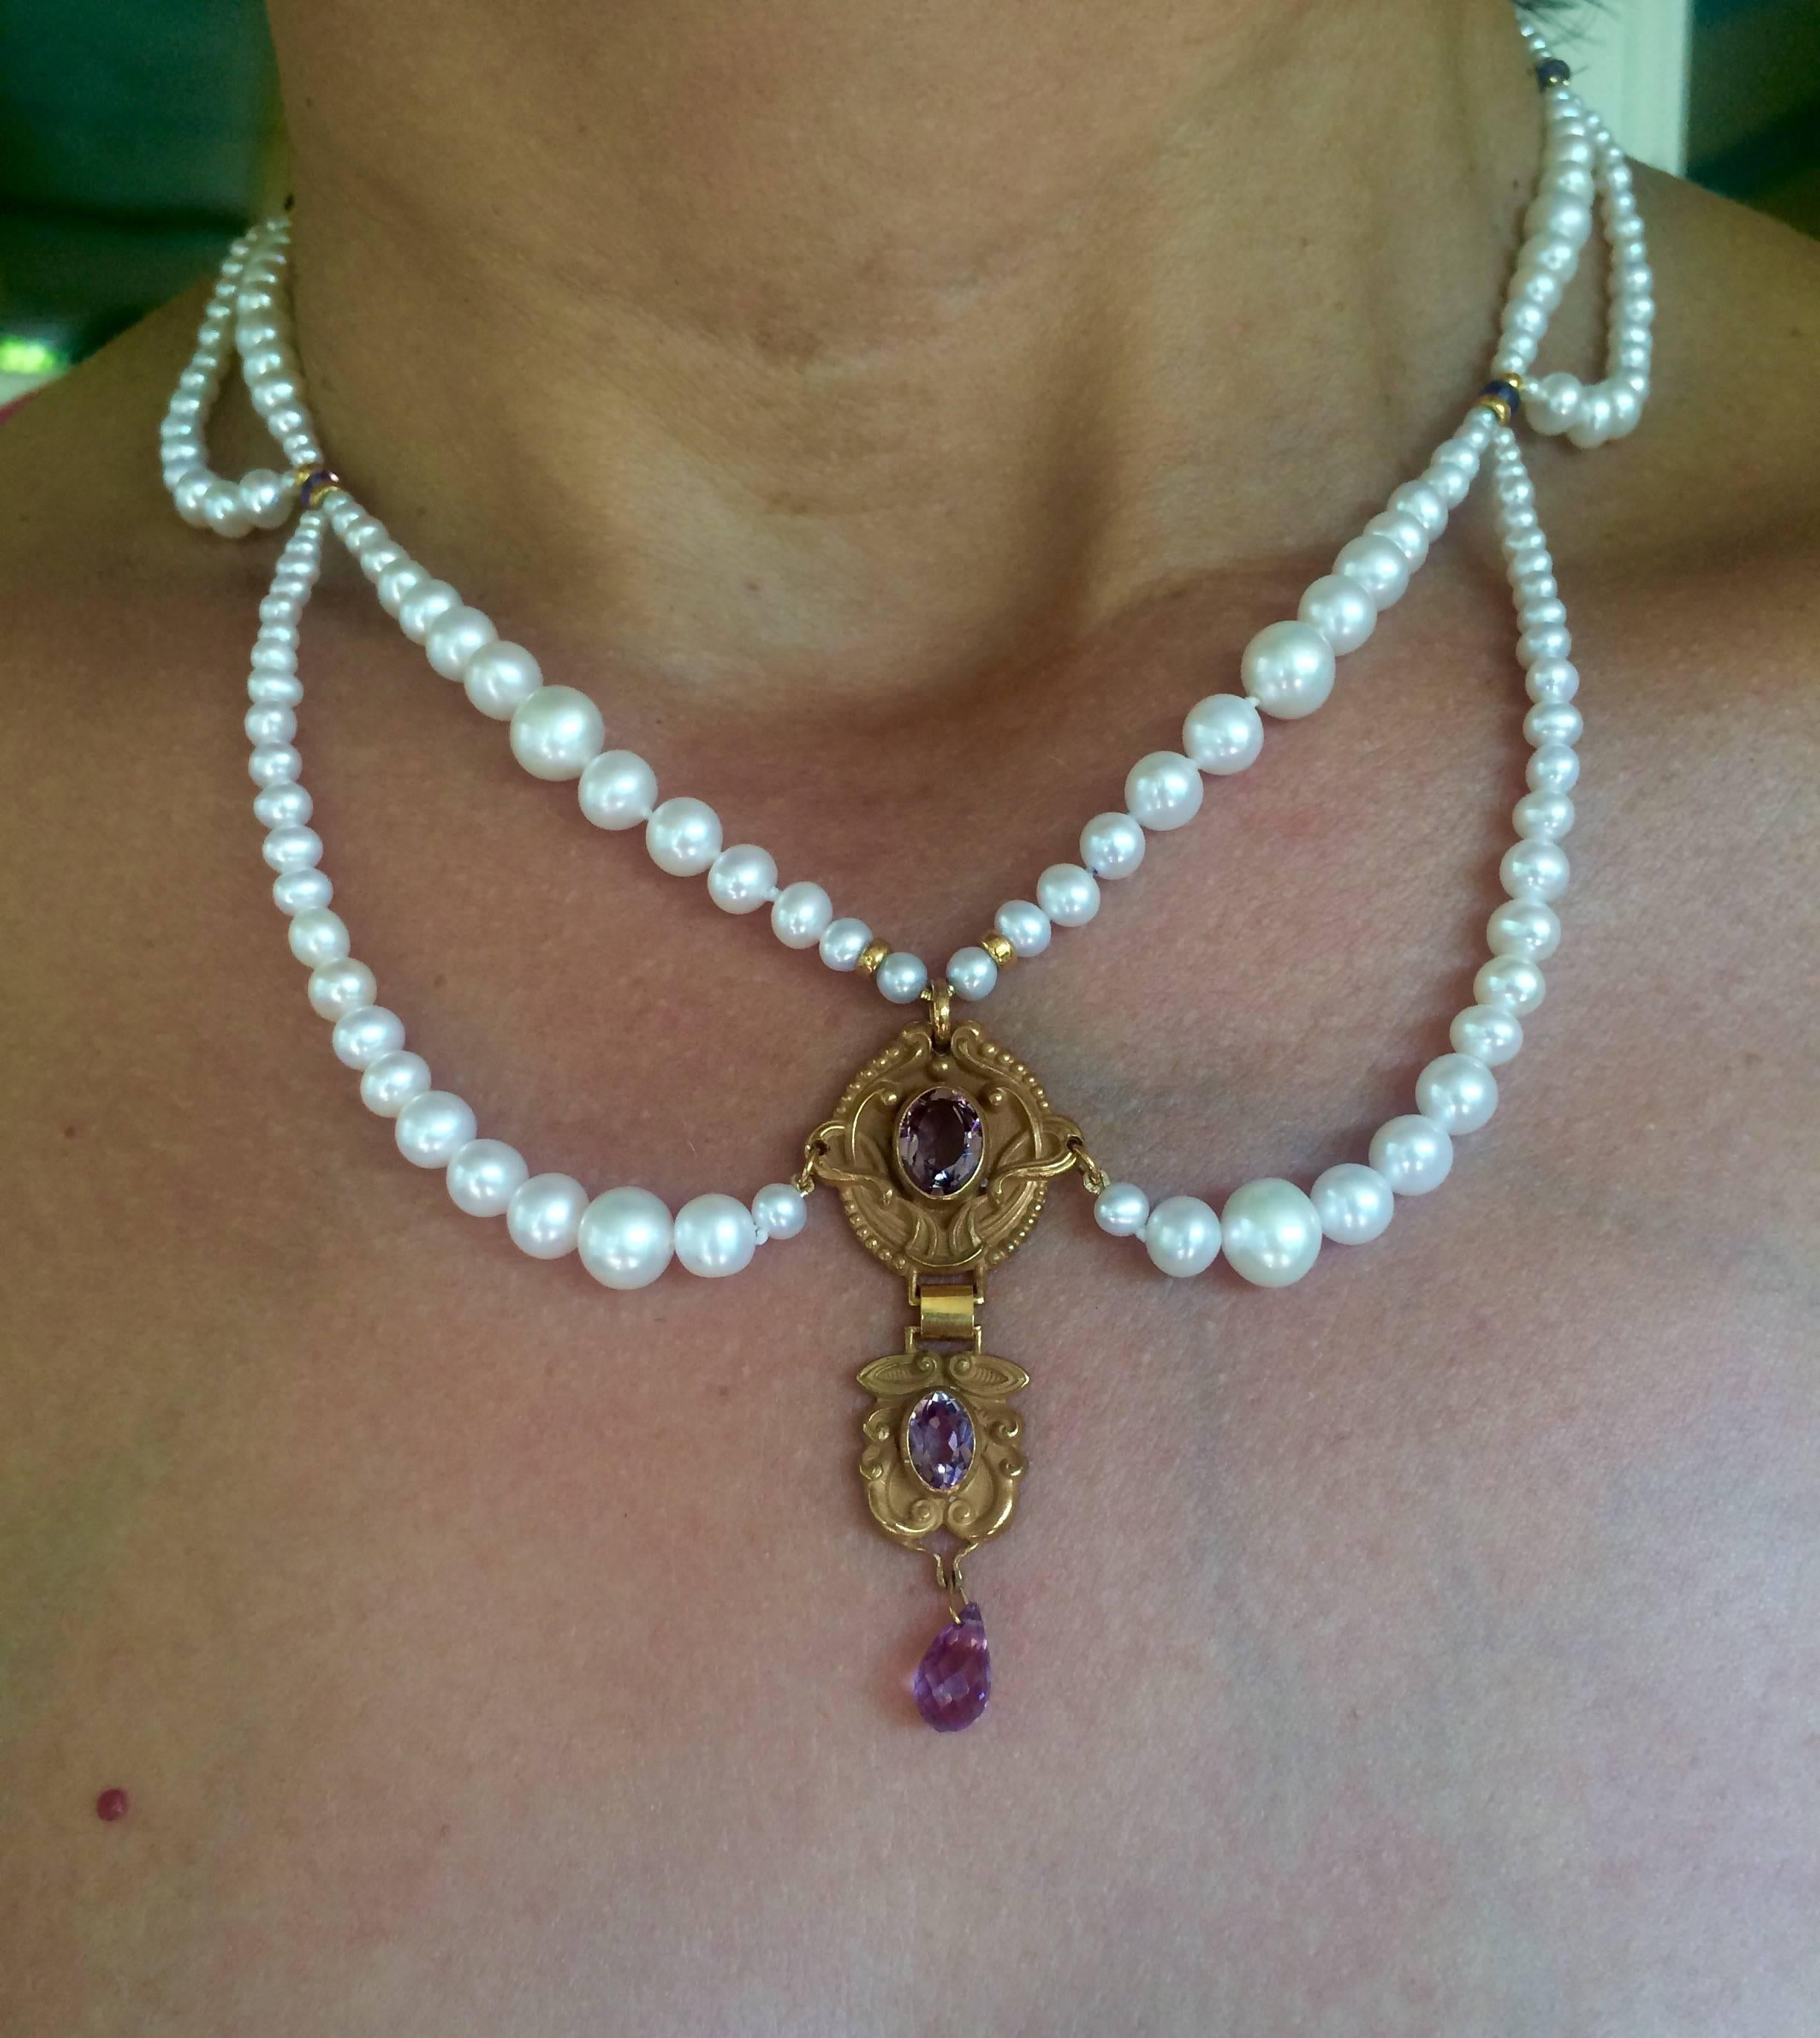 Bead Marina J Graduated Pearl Necklace with Vintage Amethyst Double Pendant